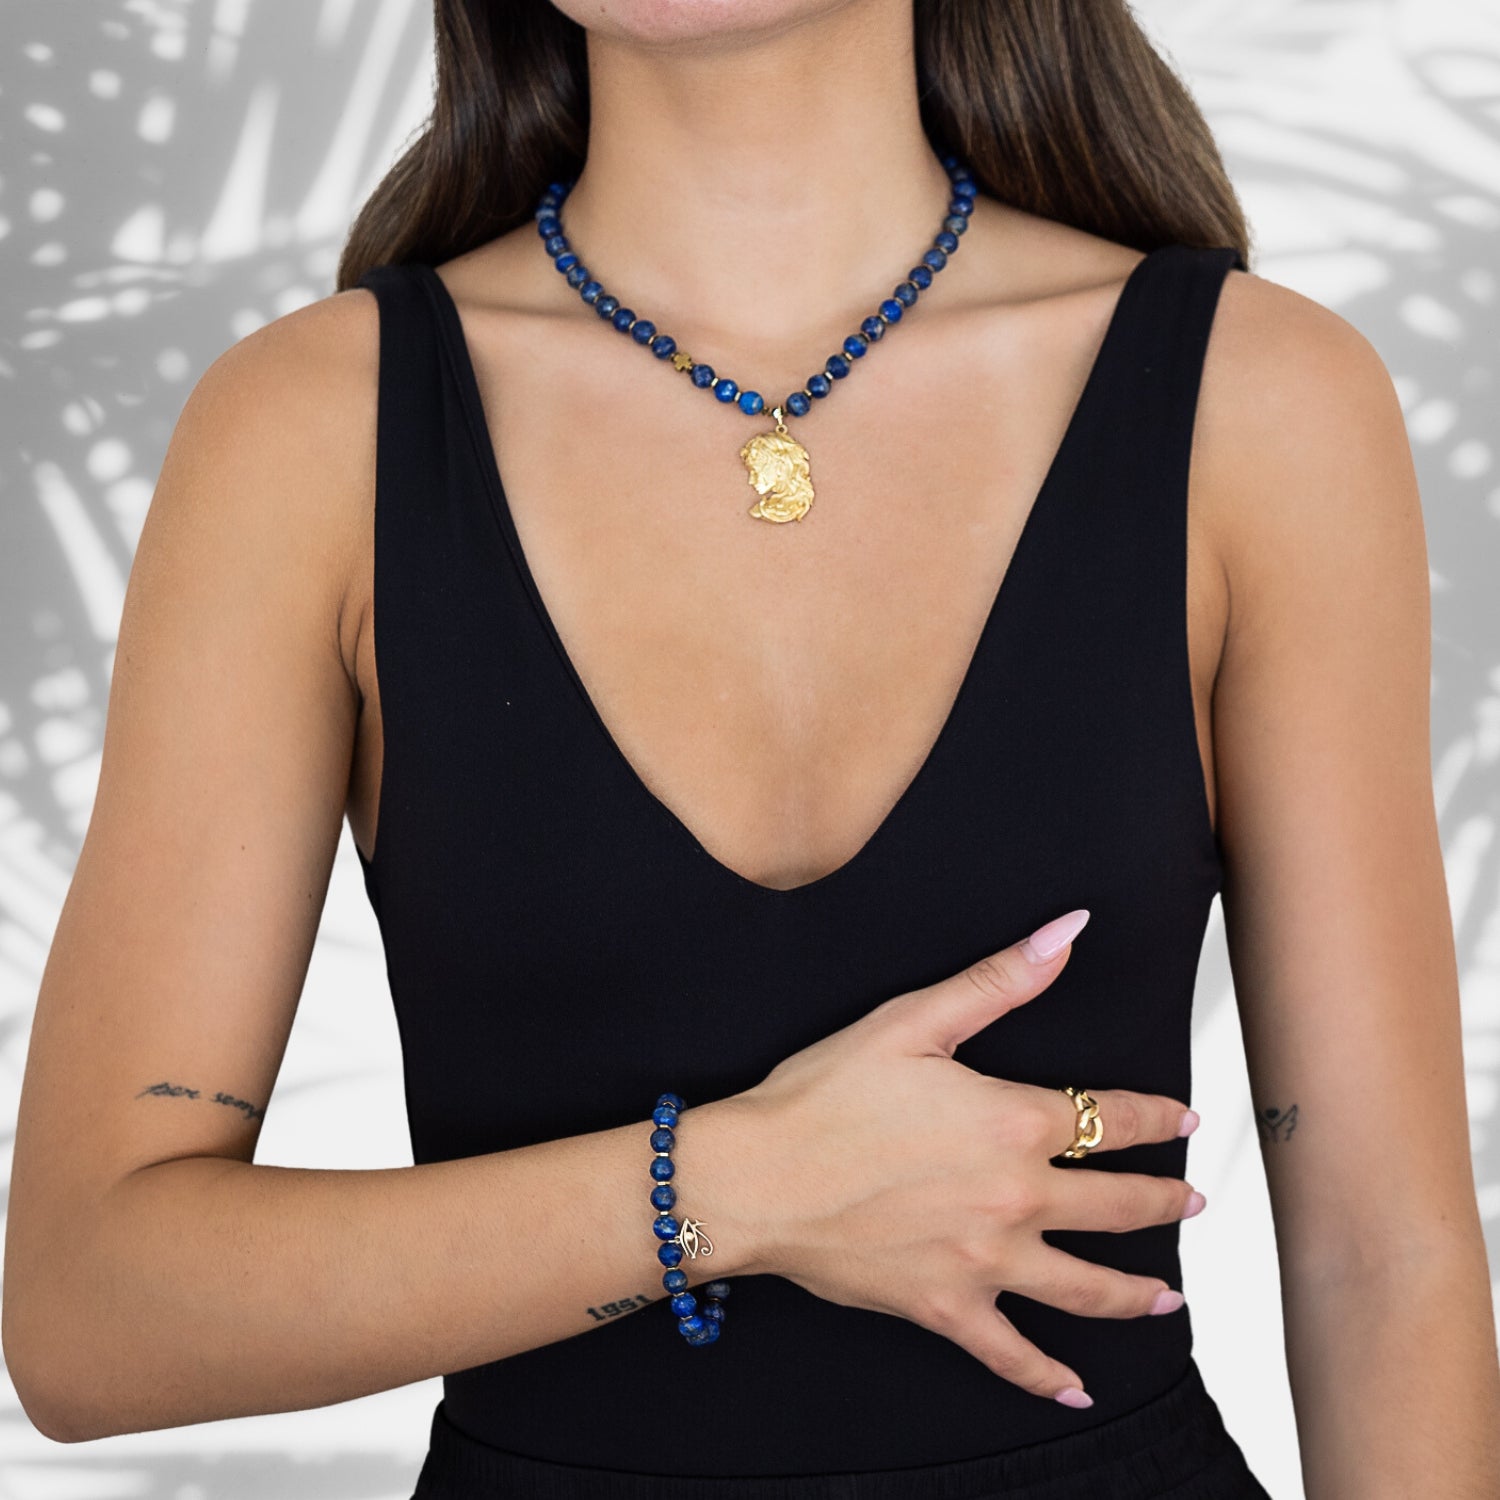 Witness the radiance of our model as she showcases the exquisite Medusa Lapis Lazuli Necklace.